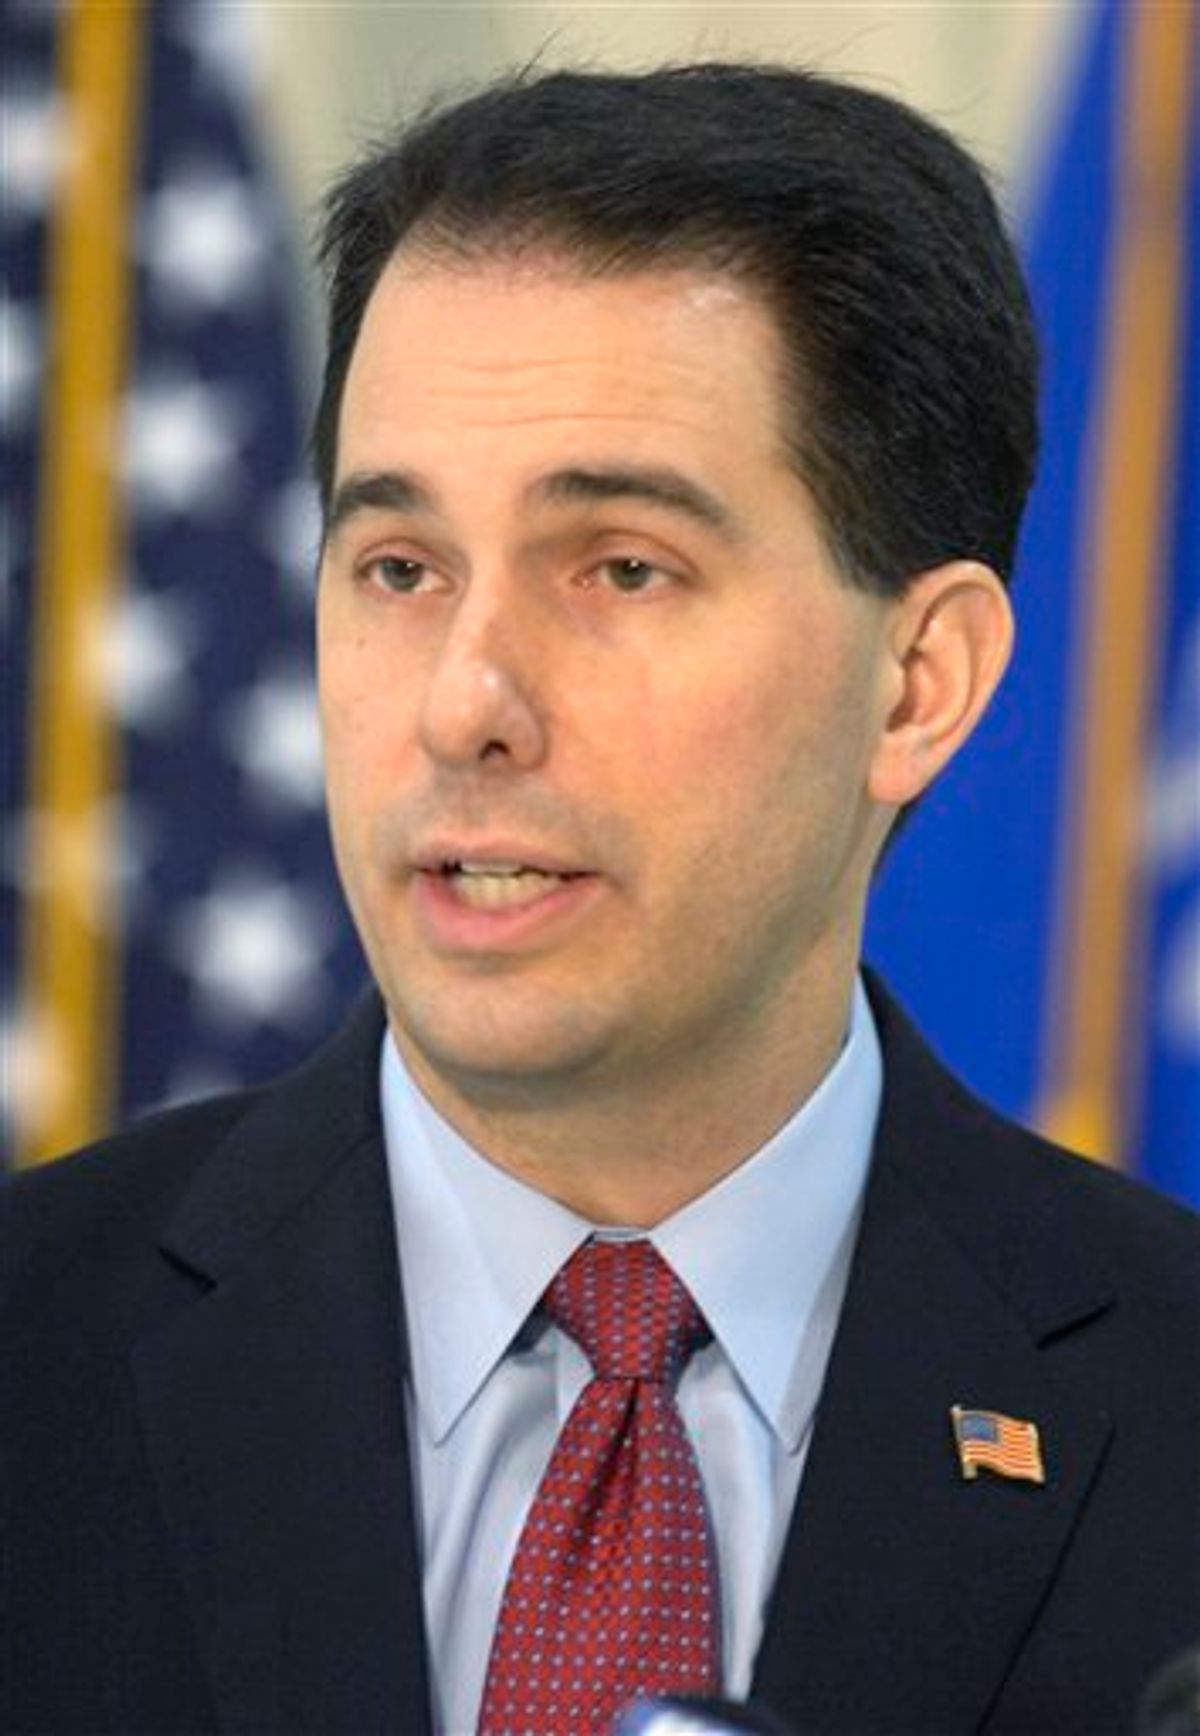 Gov. Scott Walker discusses his budget repair bill during a news conference at the Kenosha Airport in Kenosha, Wis., Friday, Feb. 25, 2011. Walker called on the missing Democratic state senators, including Kenosha's Robert Wirch, to return to the Capitol. (AP Photo/The Journal Times, Mark Hertzberg)  (AP)